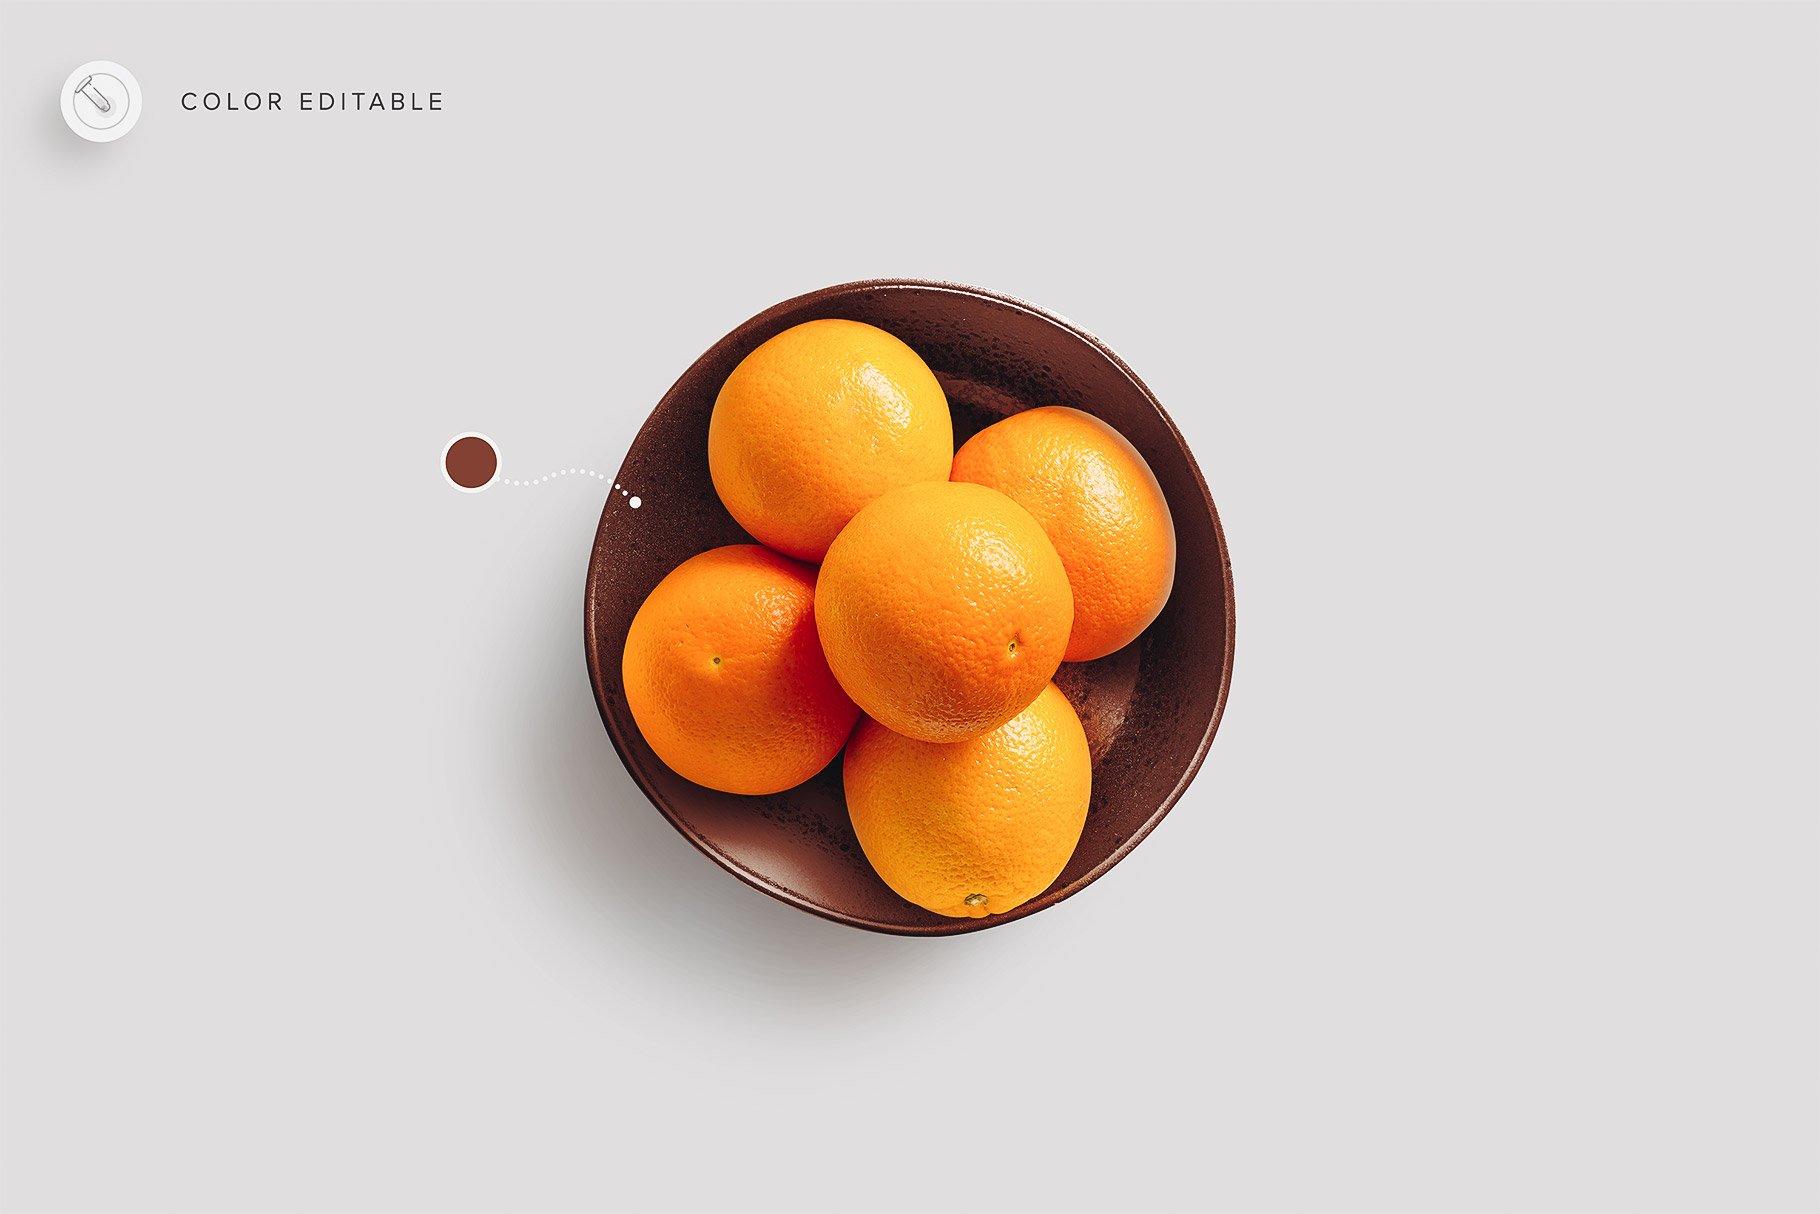 isolated objects food fruits feature coloreditable customscene 348